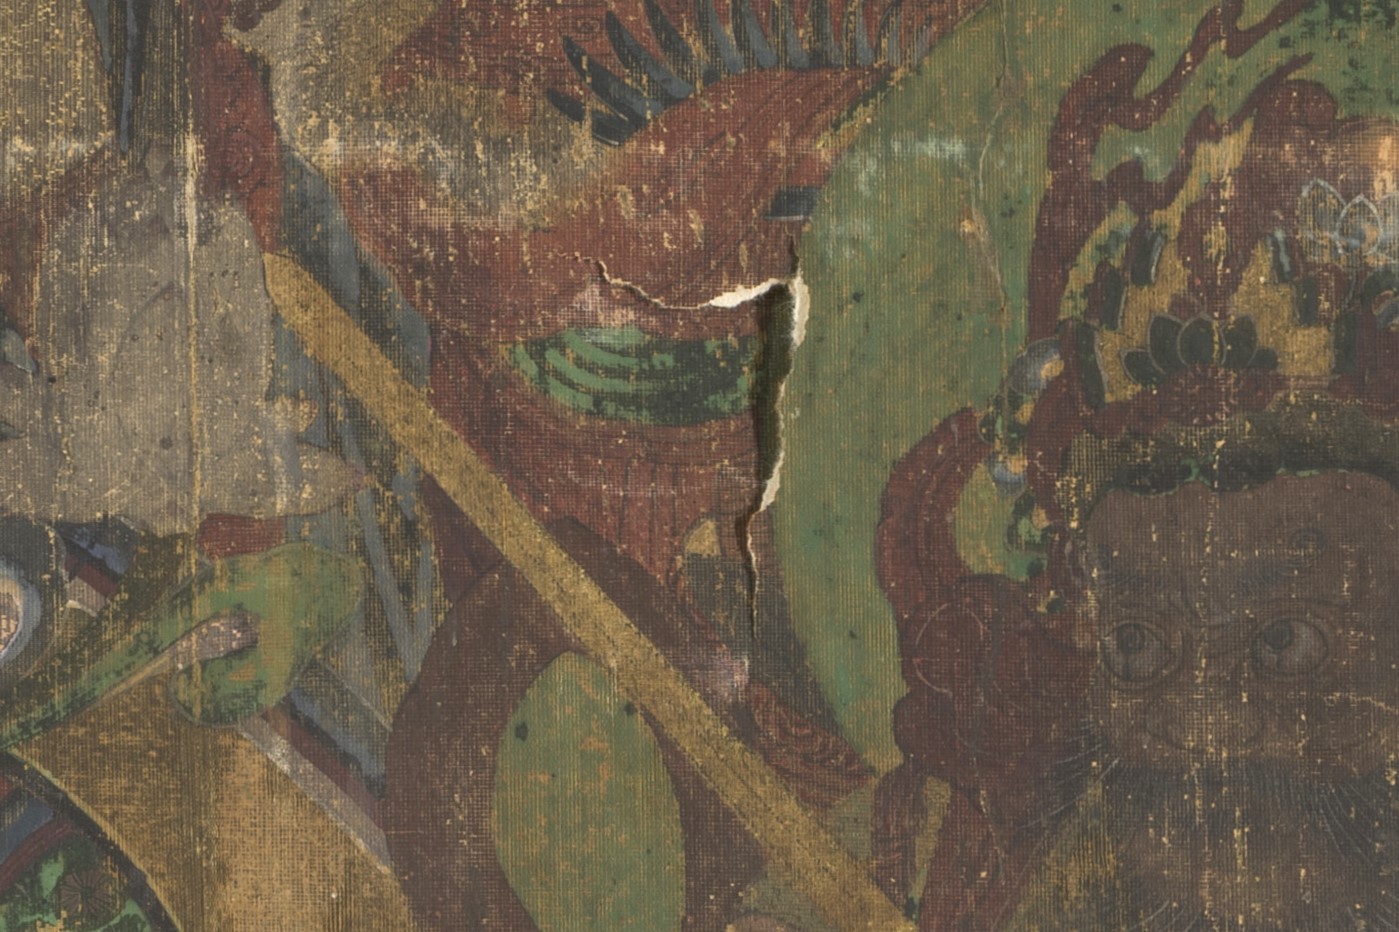 Detail showing punctured area of painting